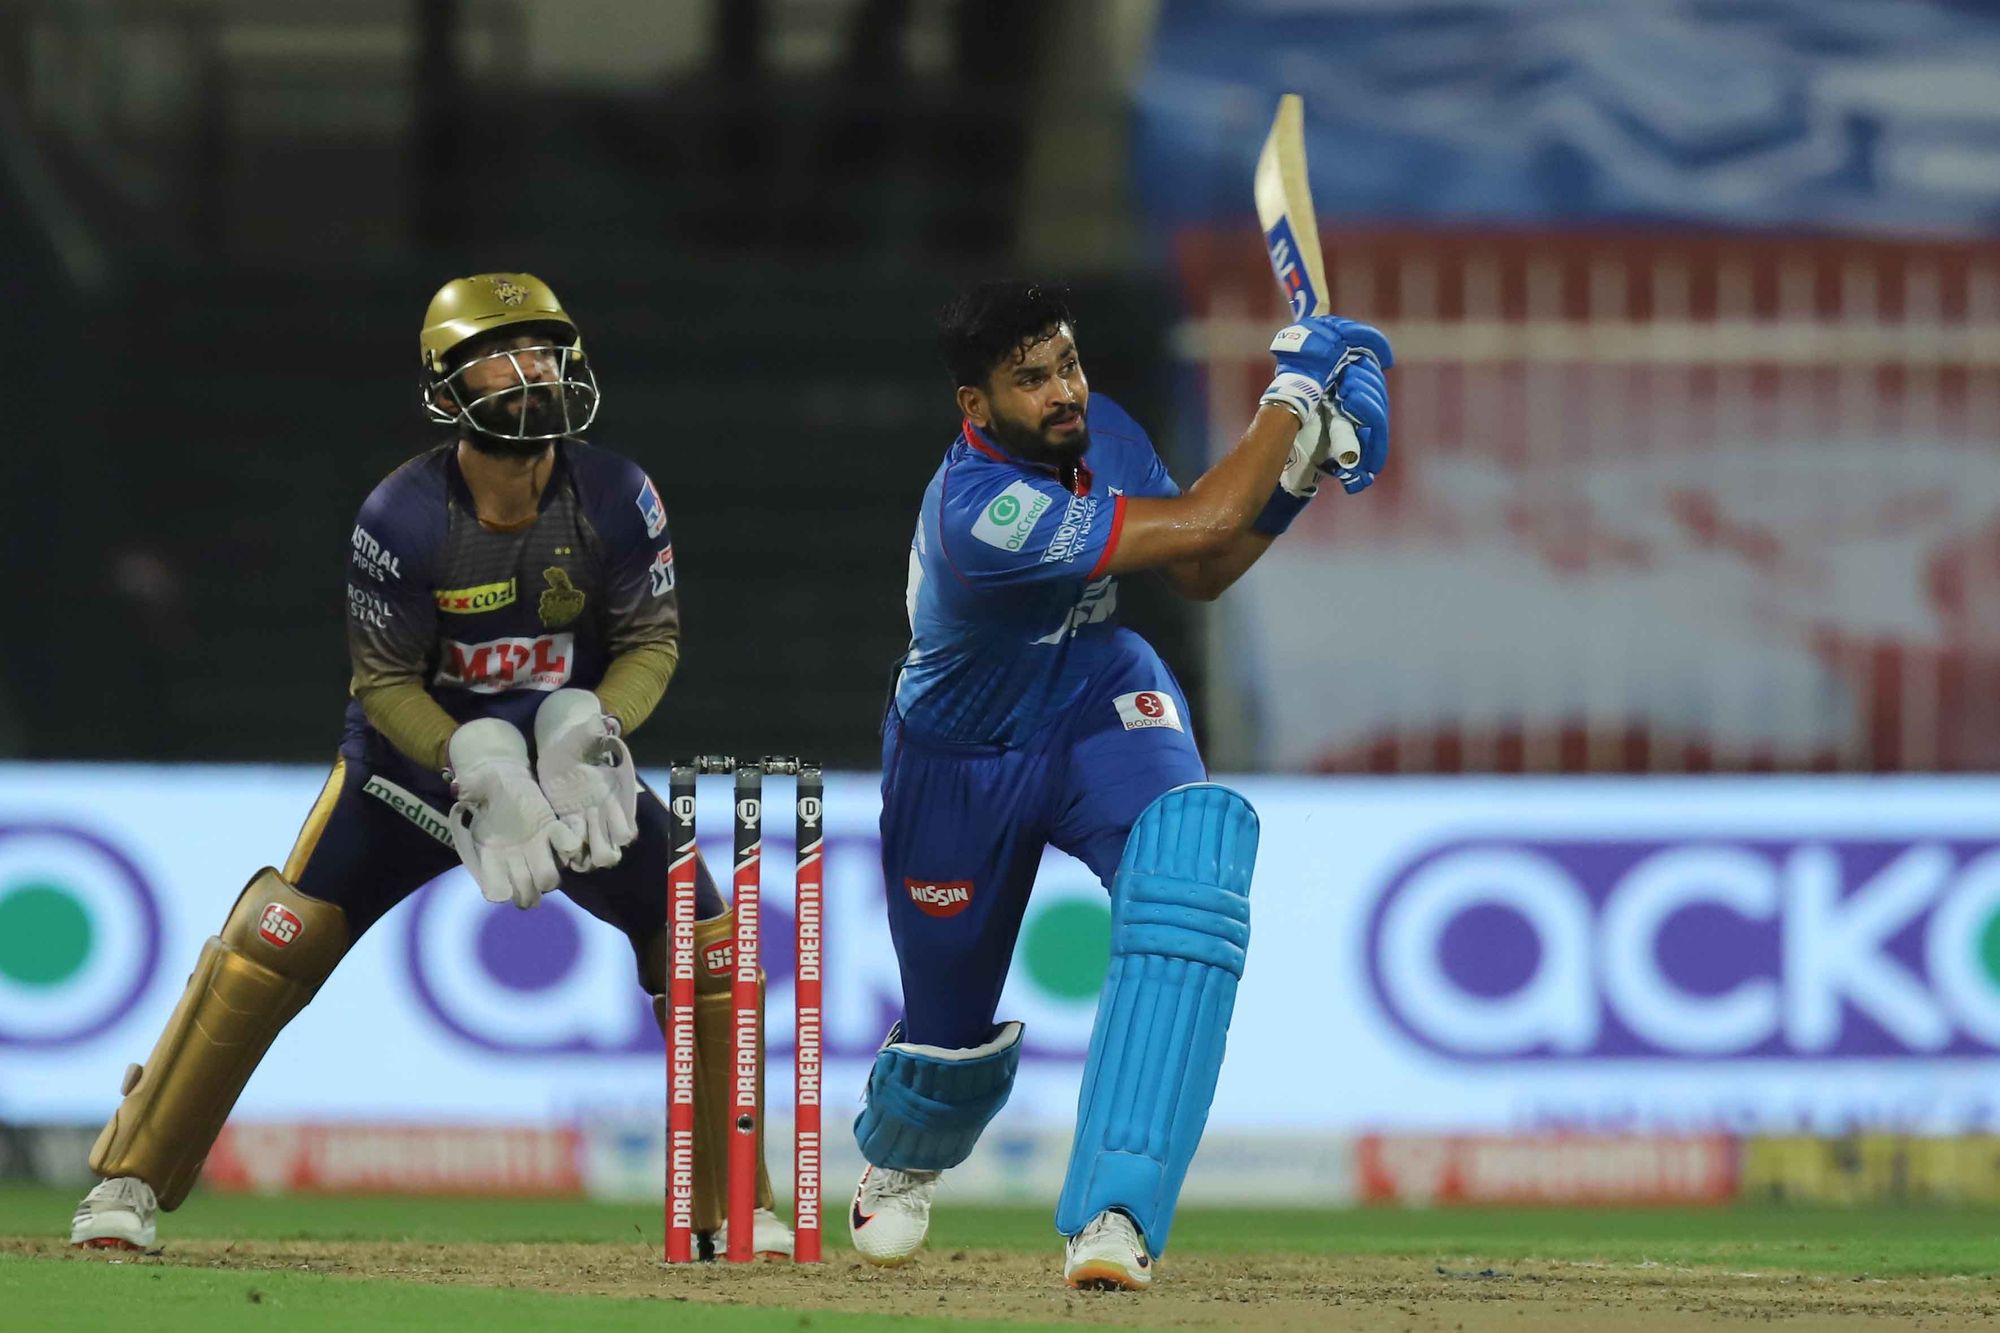 IPL 2020 | KKR vs DC : Today I Learnt - Karthik’s strange captaincy and Miserly Mishy outpacing his age